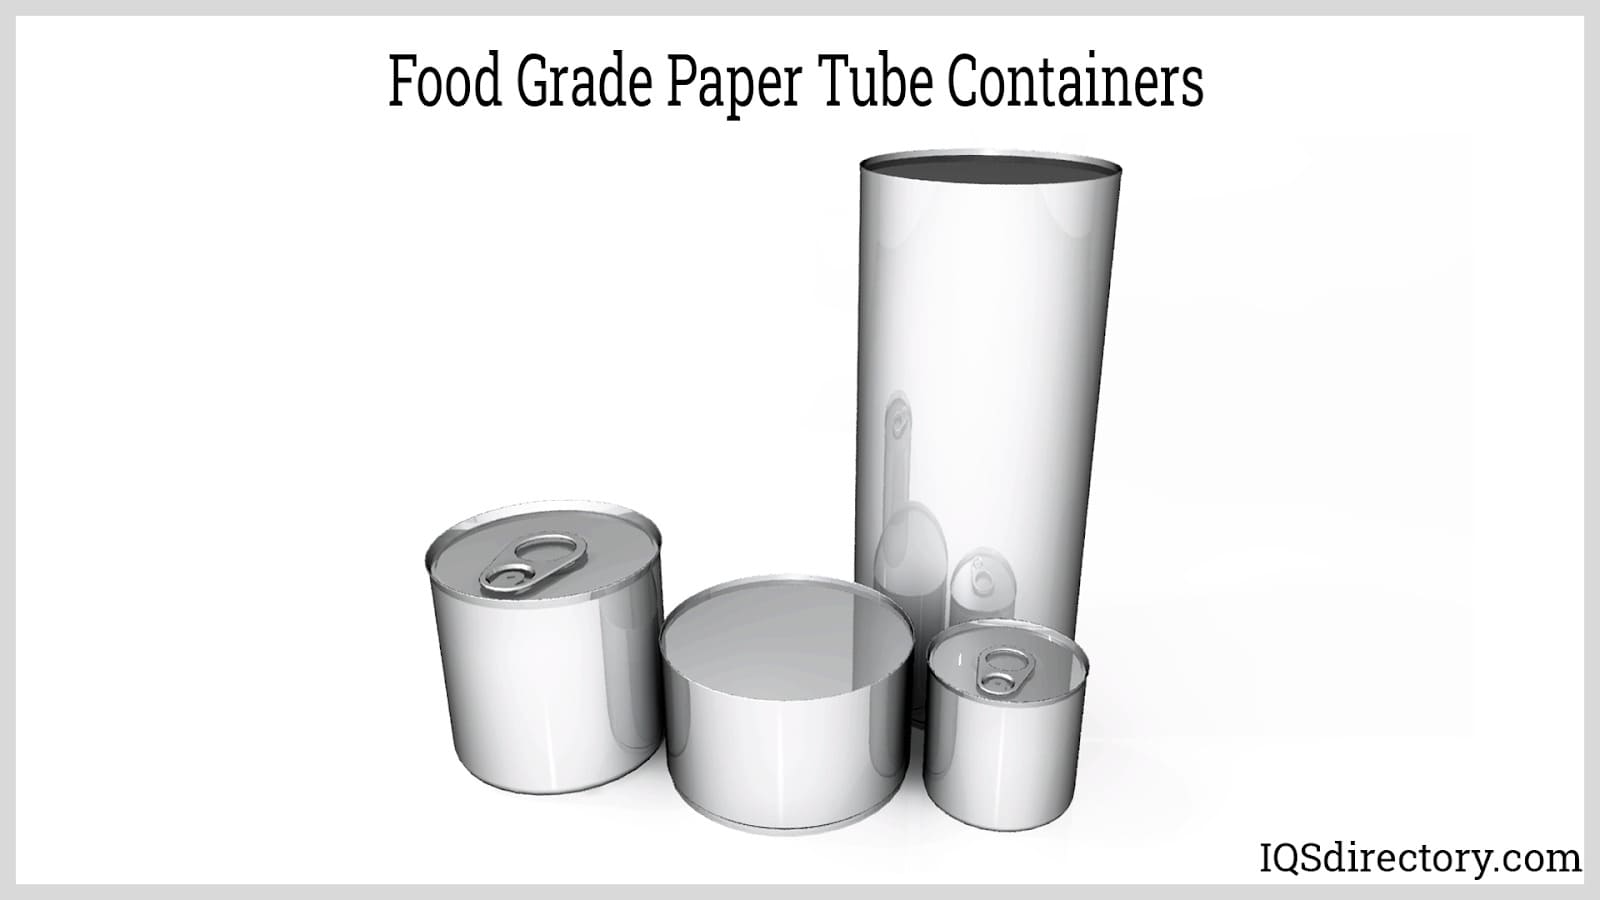 Food Grade Paper Tube Containers